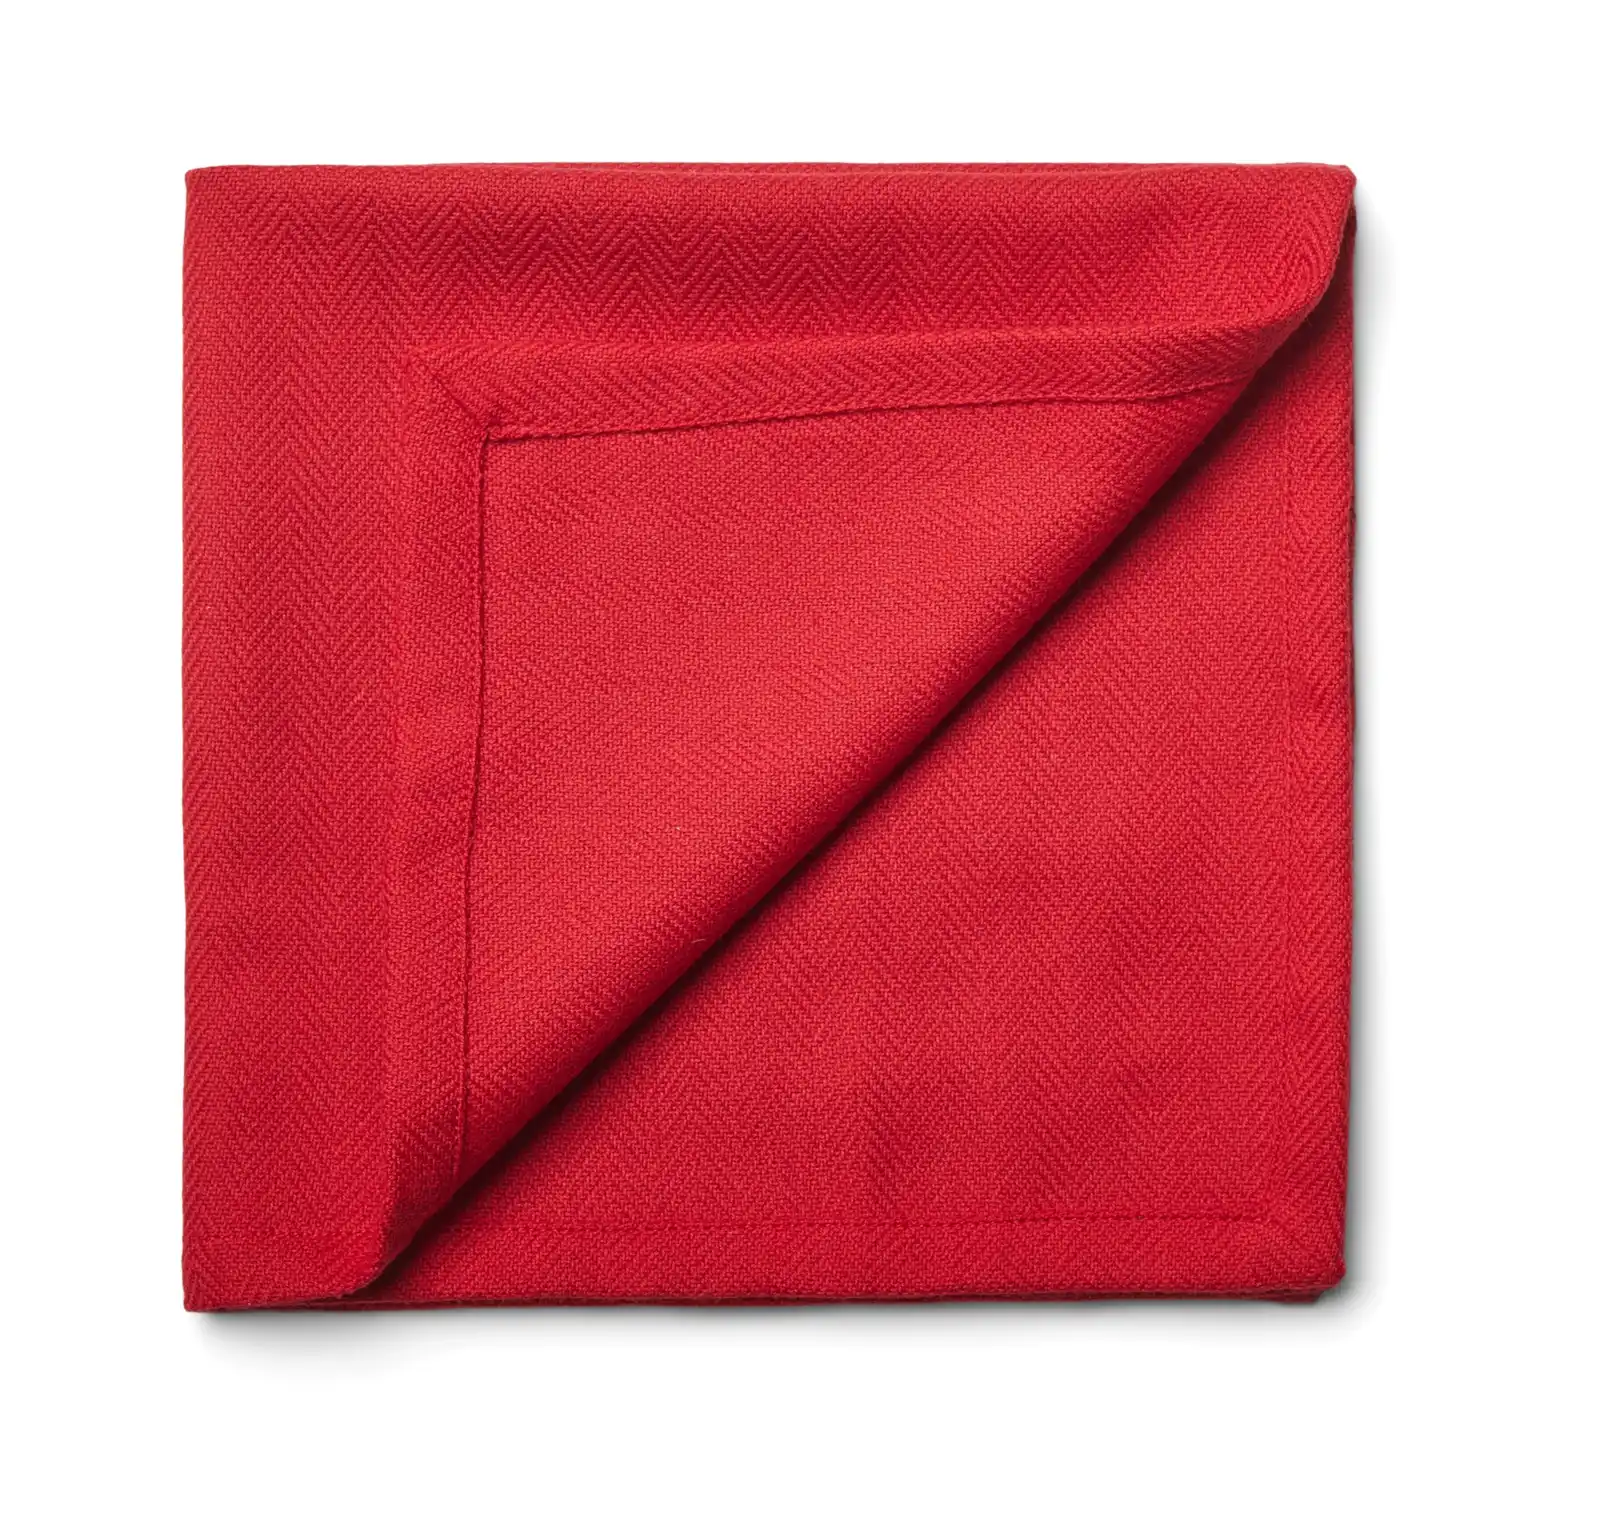 Napkin - 2 pack Christmas Red